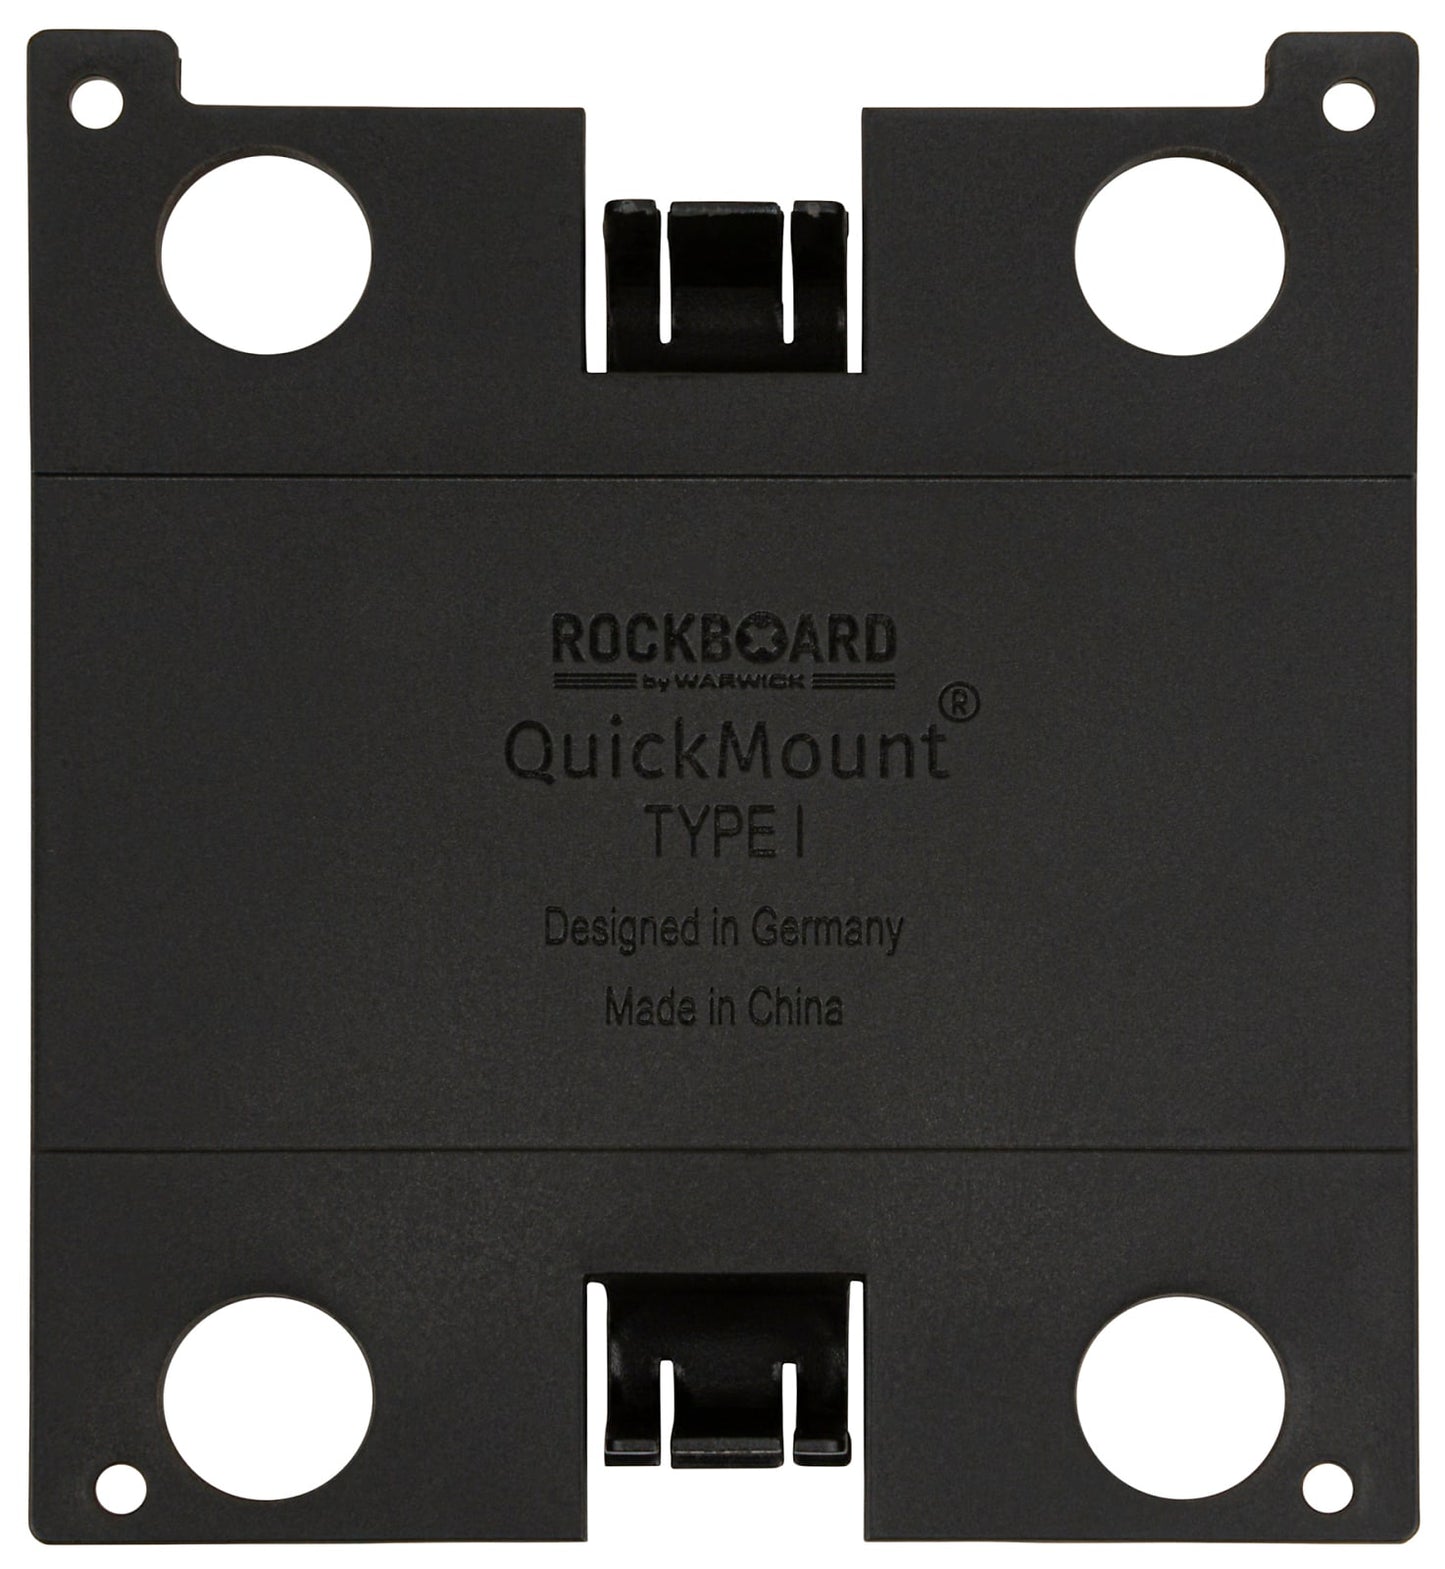 Rockboard Pedalboard Quickmount Type I Pedal Mounting plate for Eventide H9 Pedals